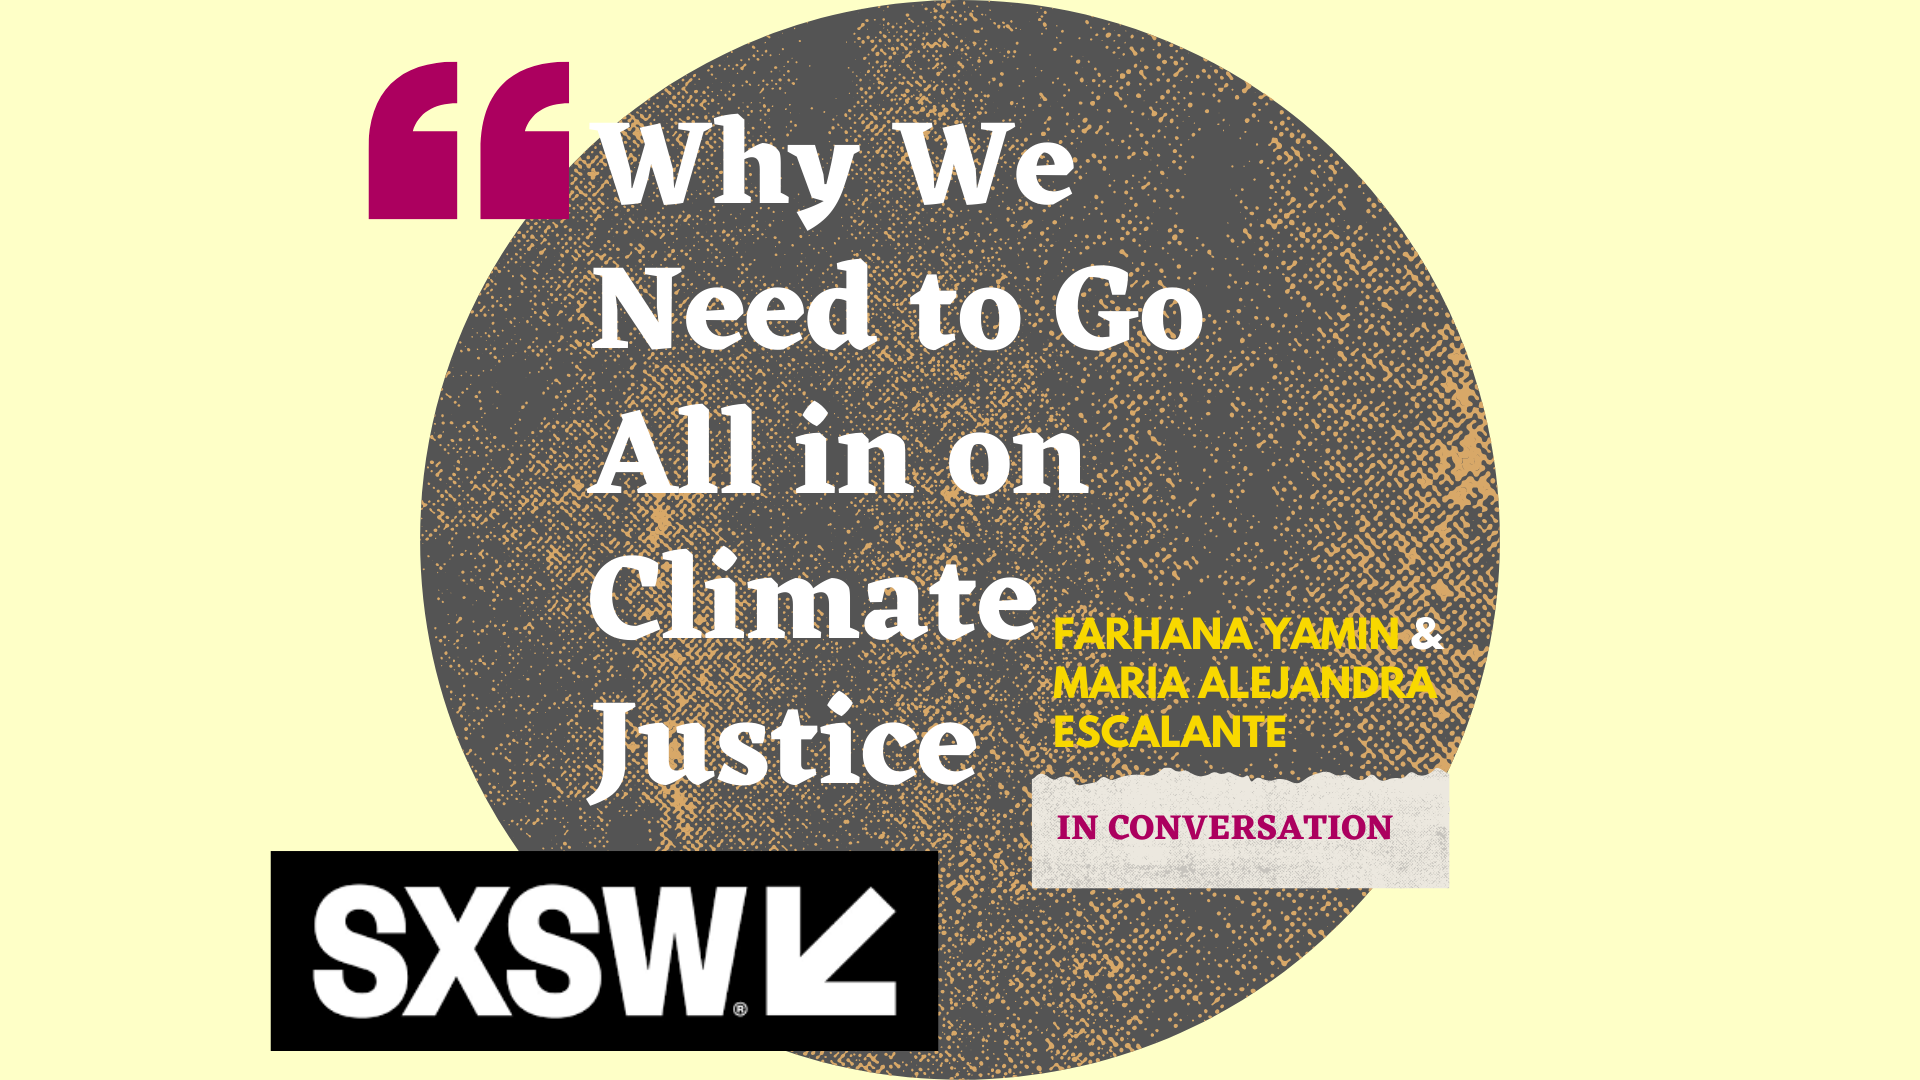 SXSW: Why We Need To Go All-in On Climate Justice